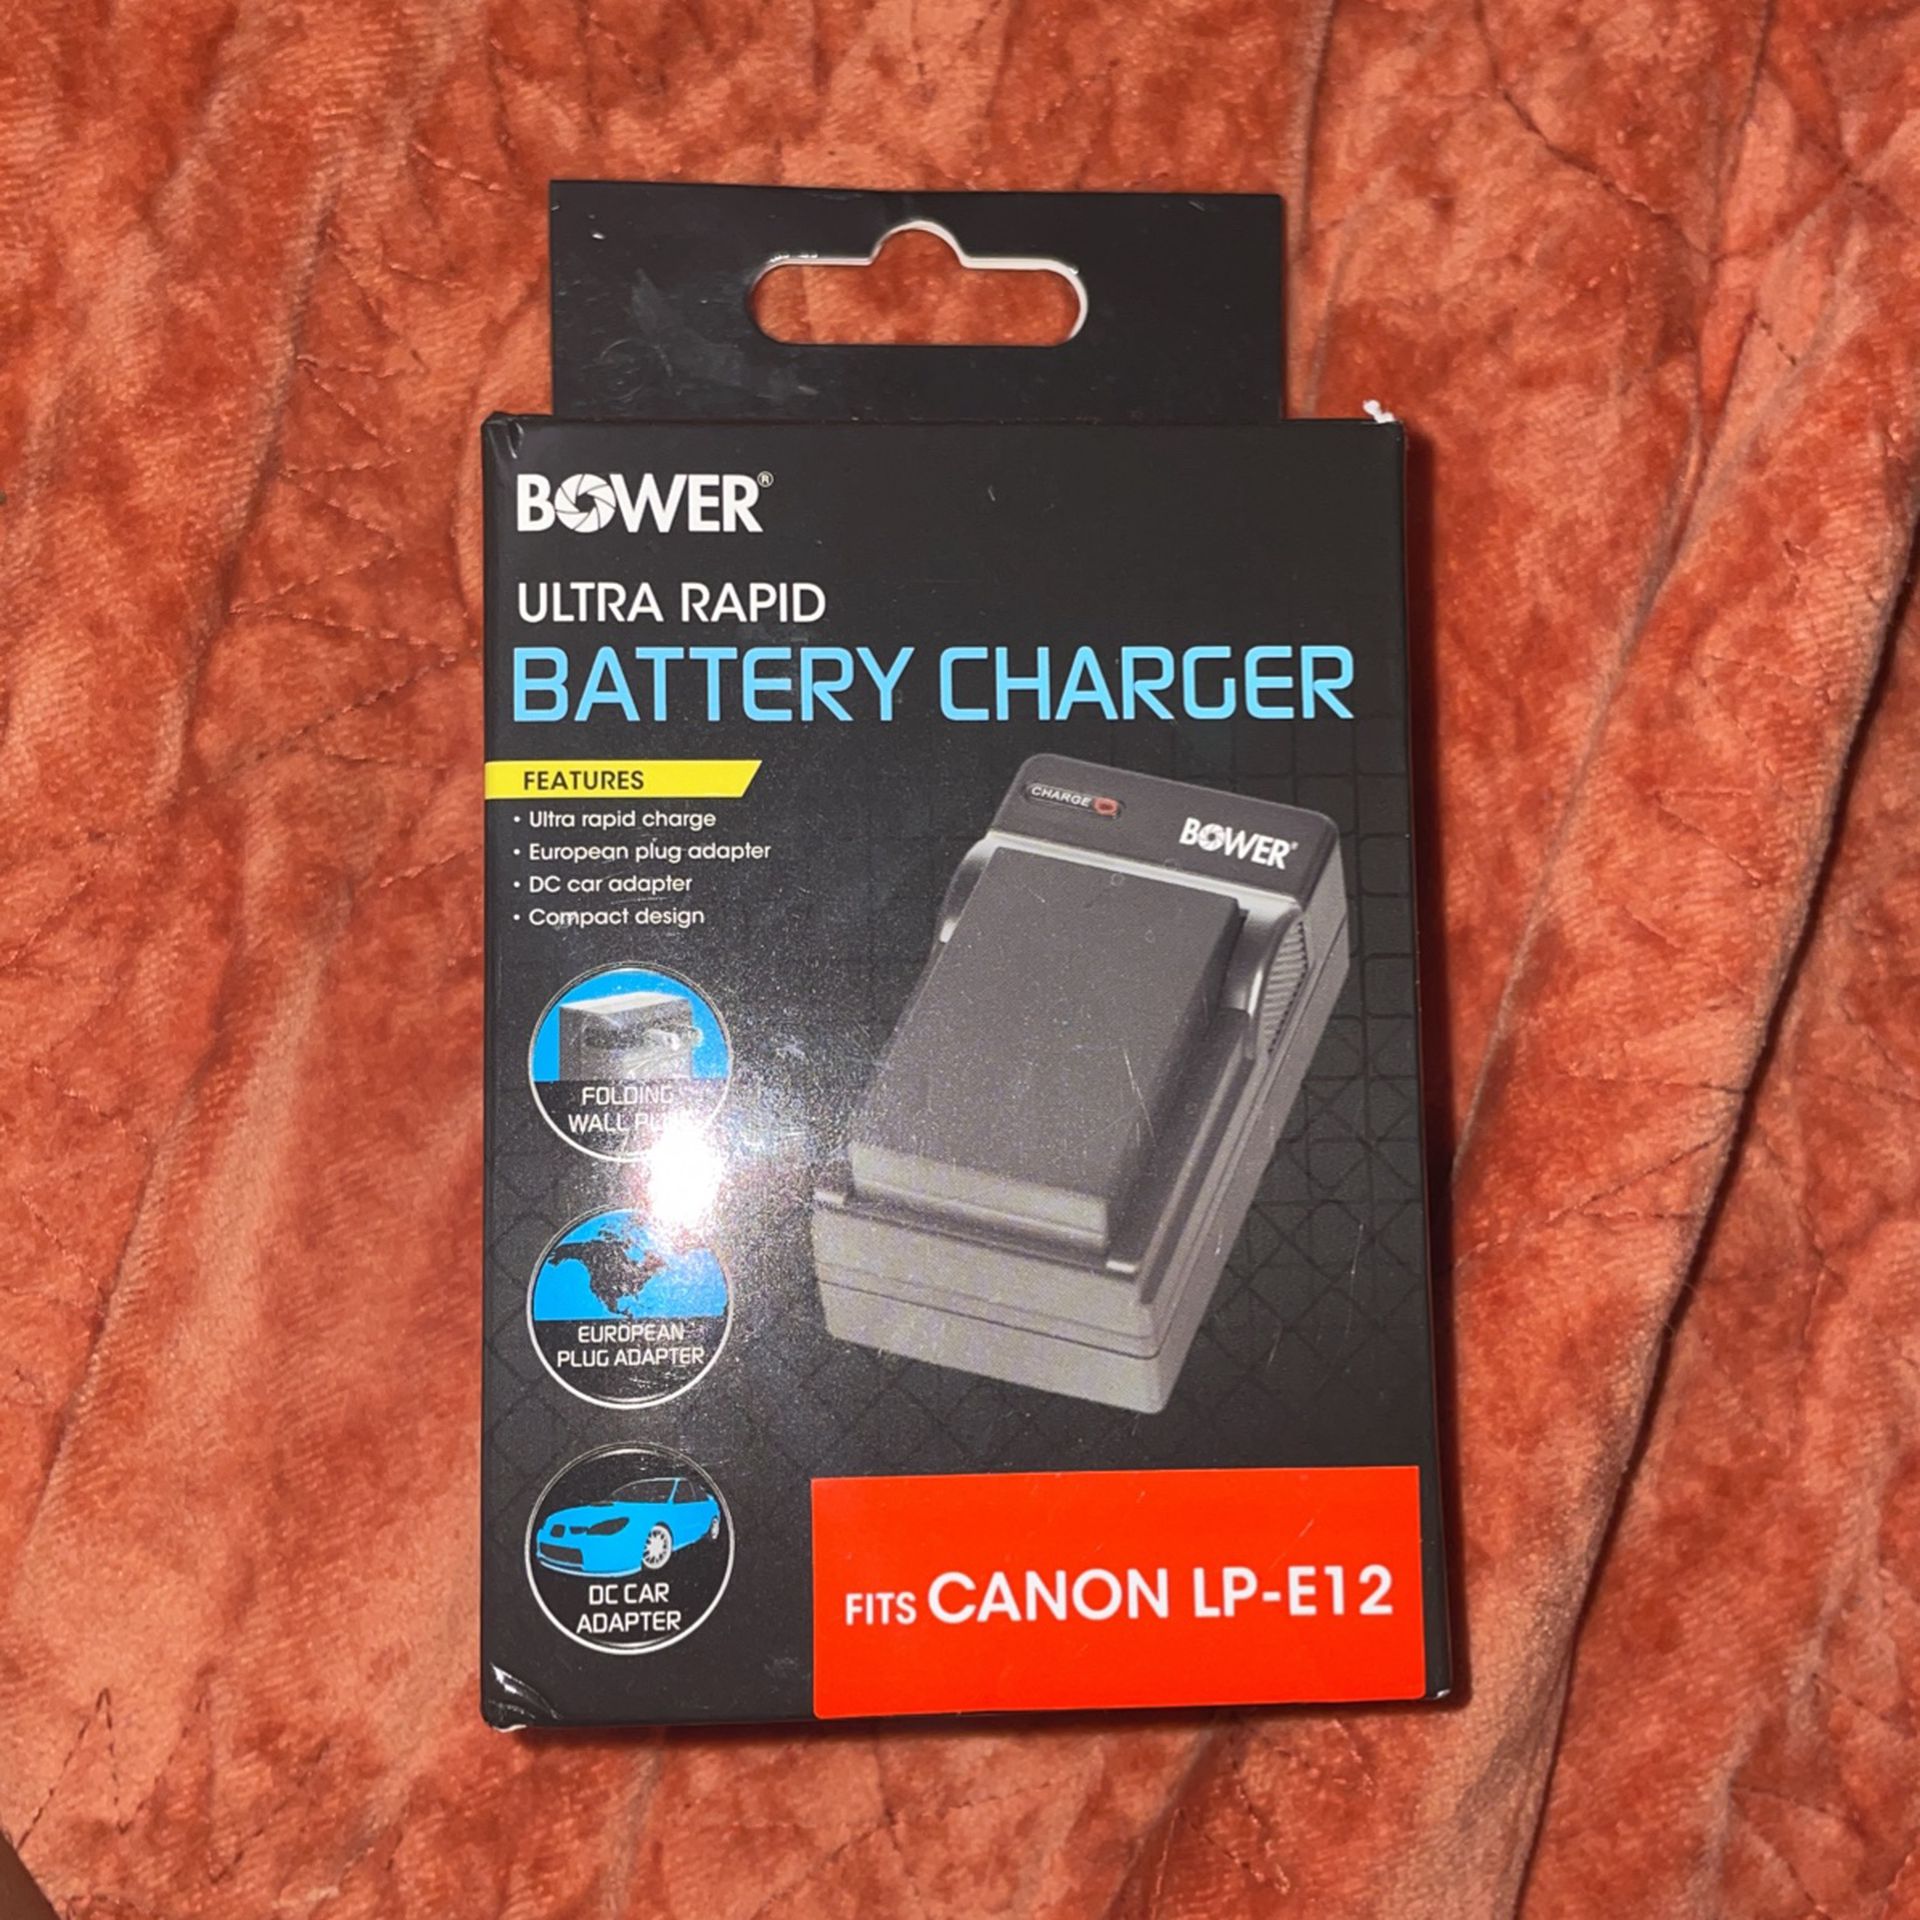 Bower Ultra Rapid Battery Charger 